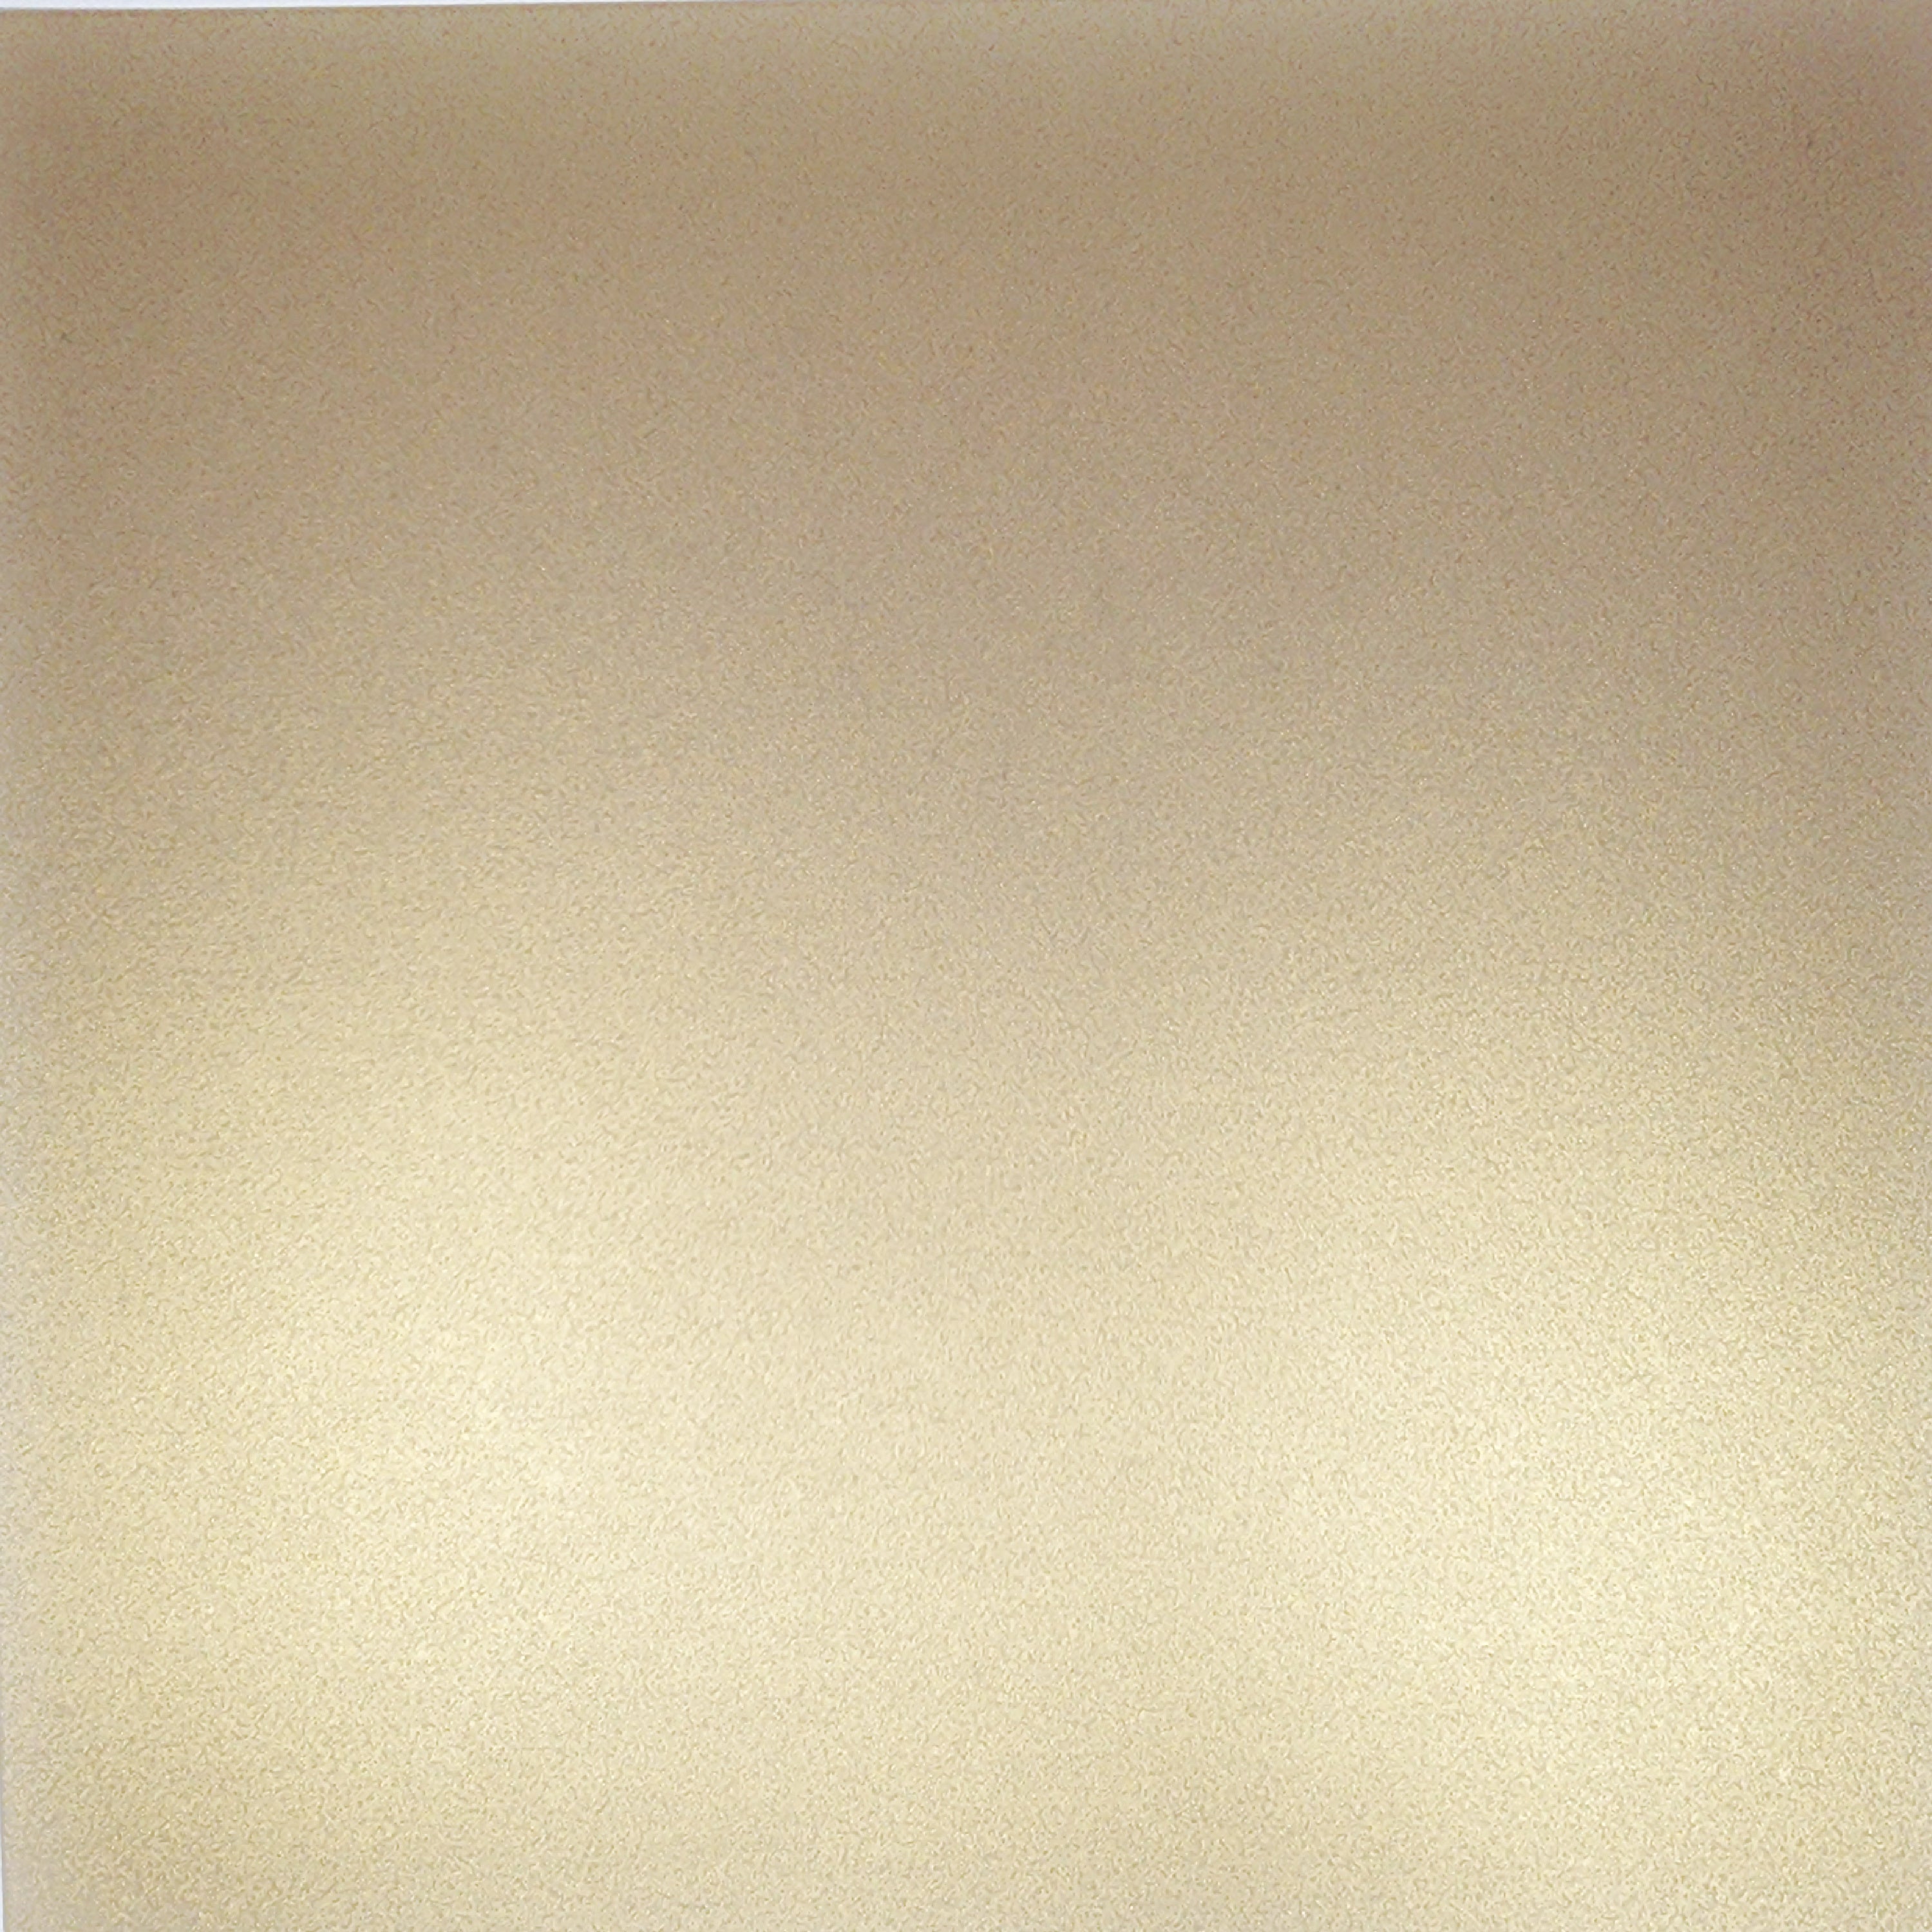 Pearlescent Pale Gold Cardstock - 12 x 12 inch - 105Lb Cover - 20